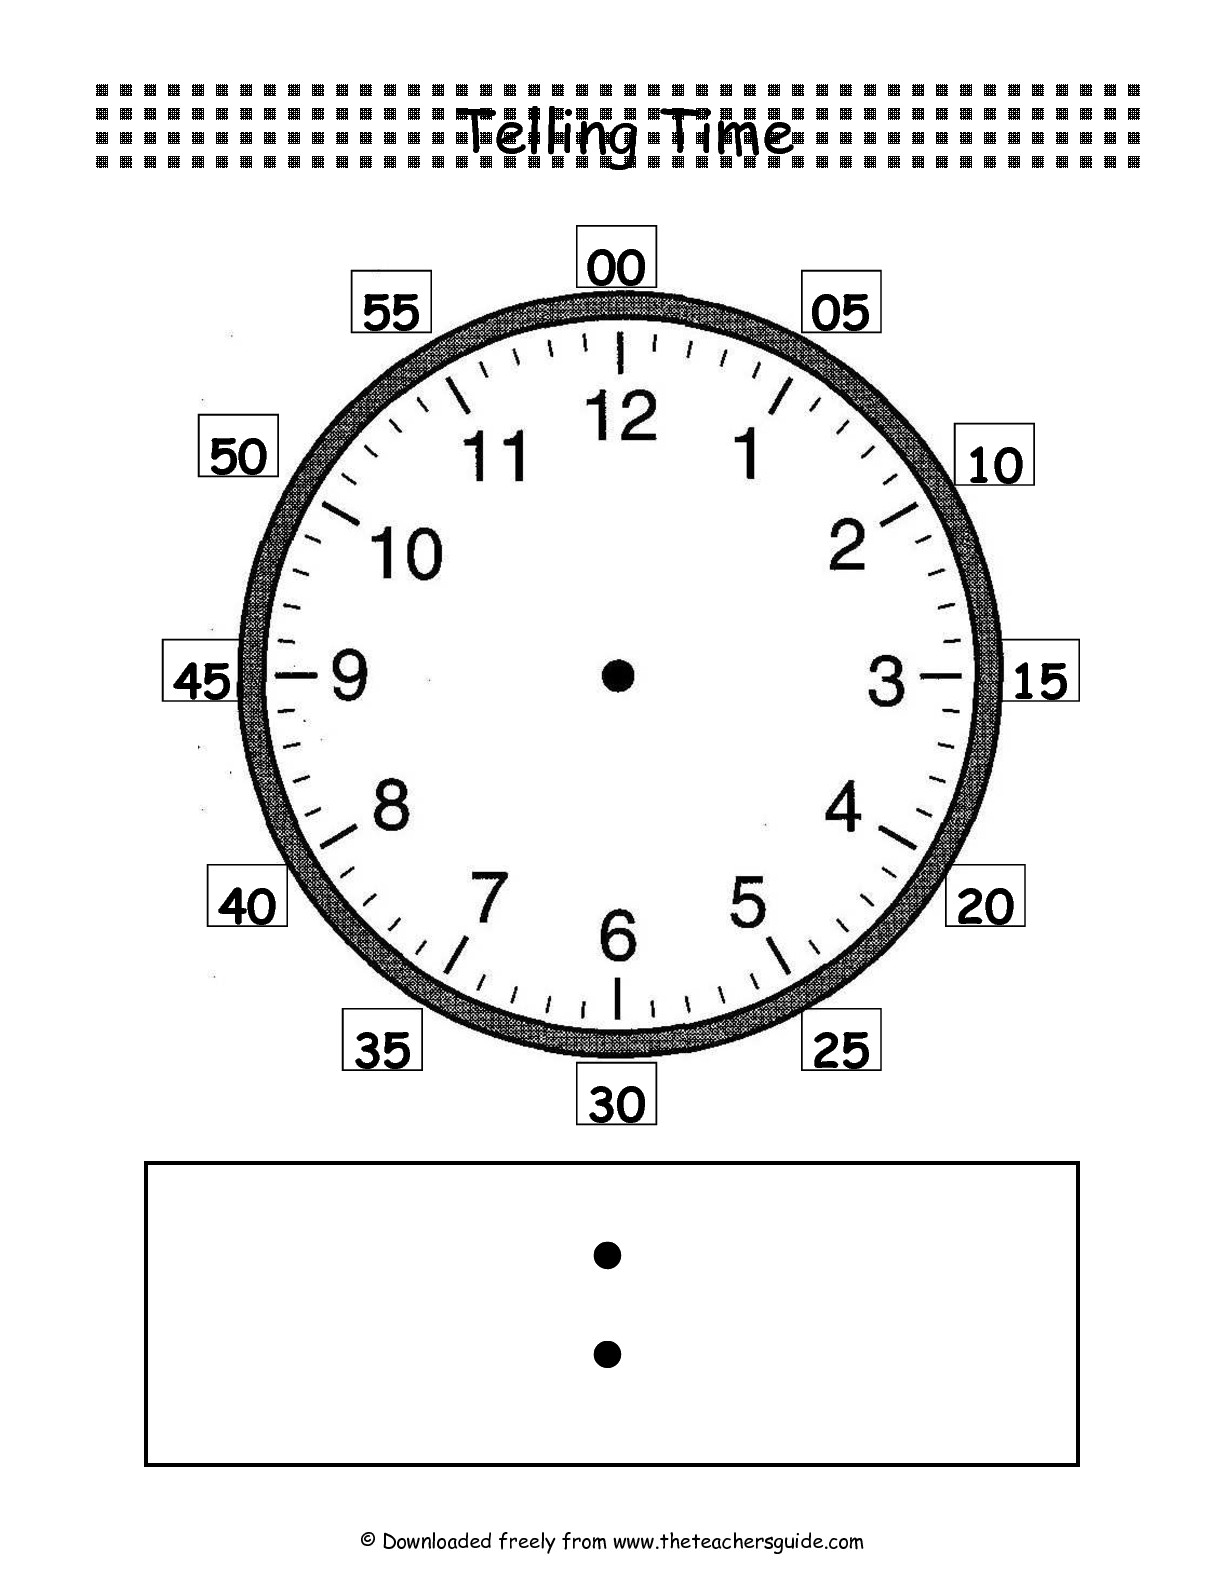 Telling Time Worksheets from The Teacher's Guide